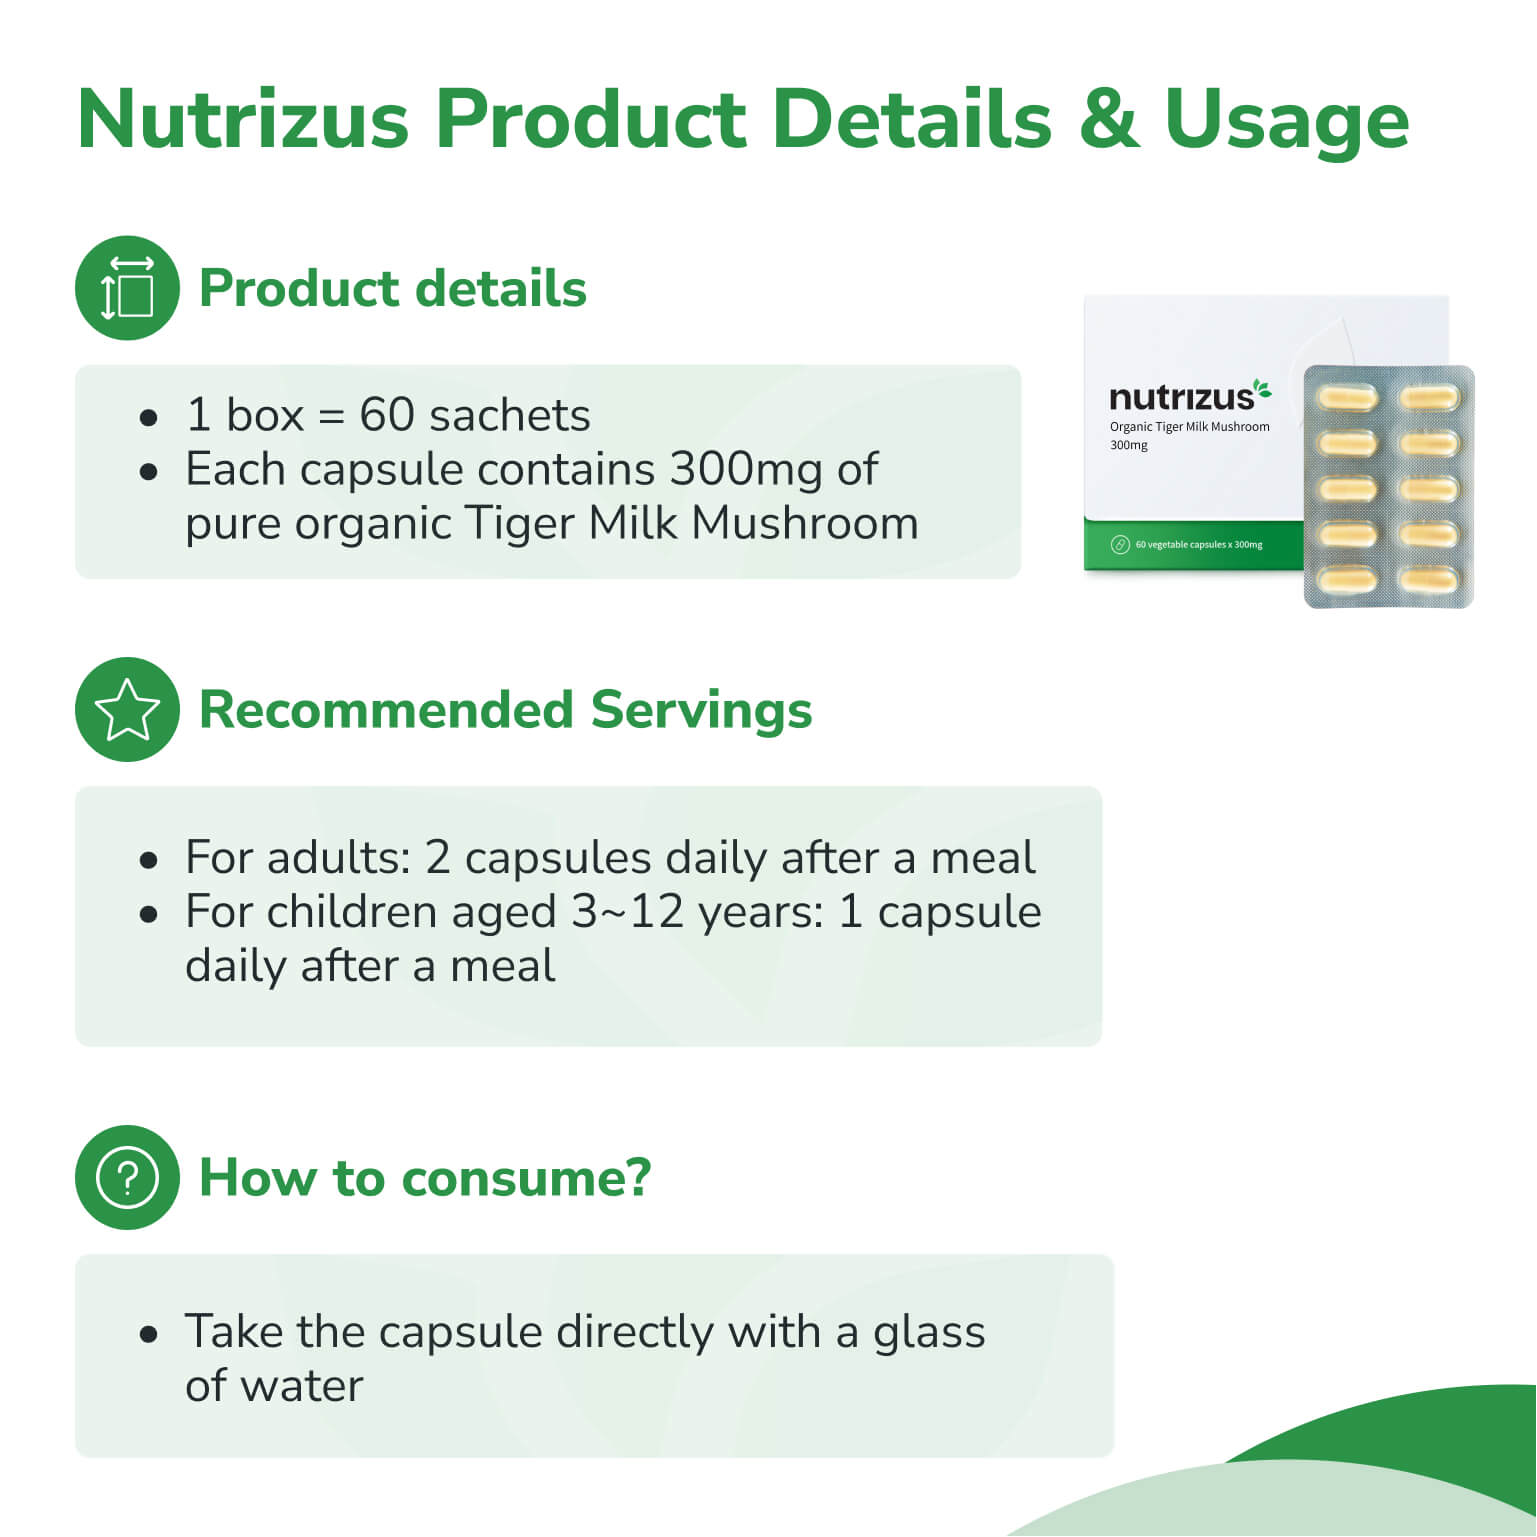 Nutrizus product details and usage